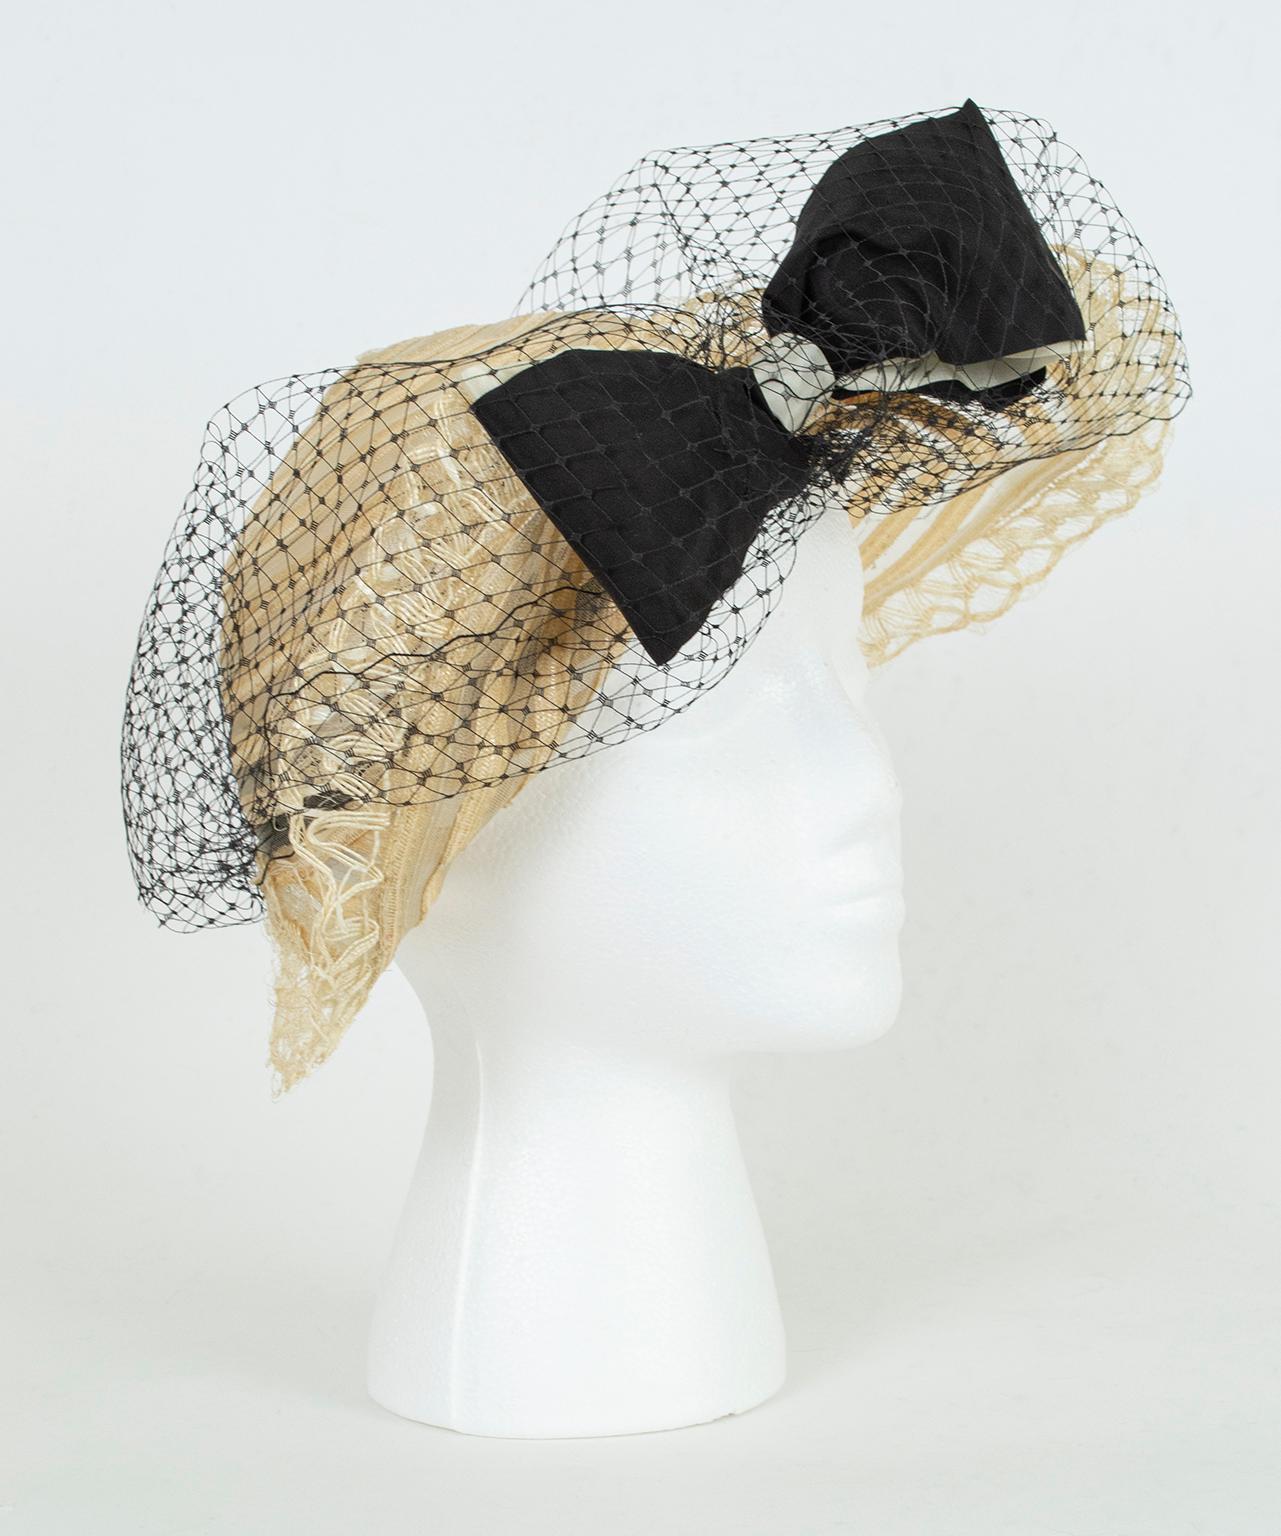 As feminine as it is clever, this diaphanous hat recalls to the one made famous by Mia Farrow on the official movie poster for 1974’s “The Great Gatsby” (pictured). Neither floppy nor structured, its half brim is pinned at the center front by an